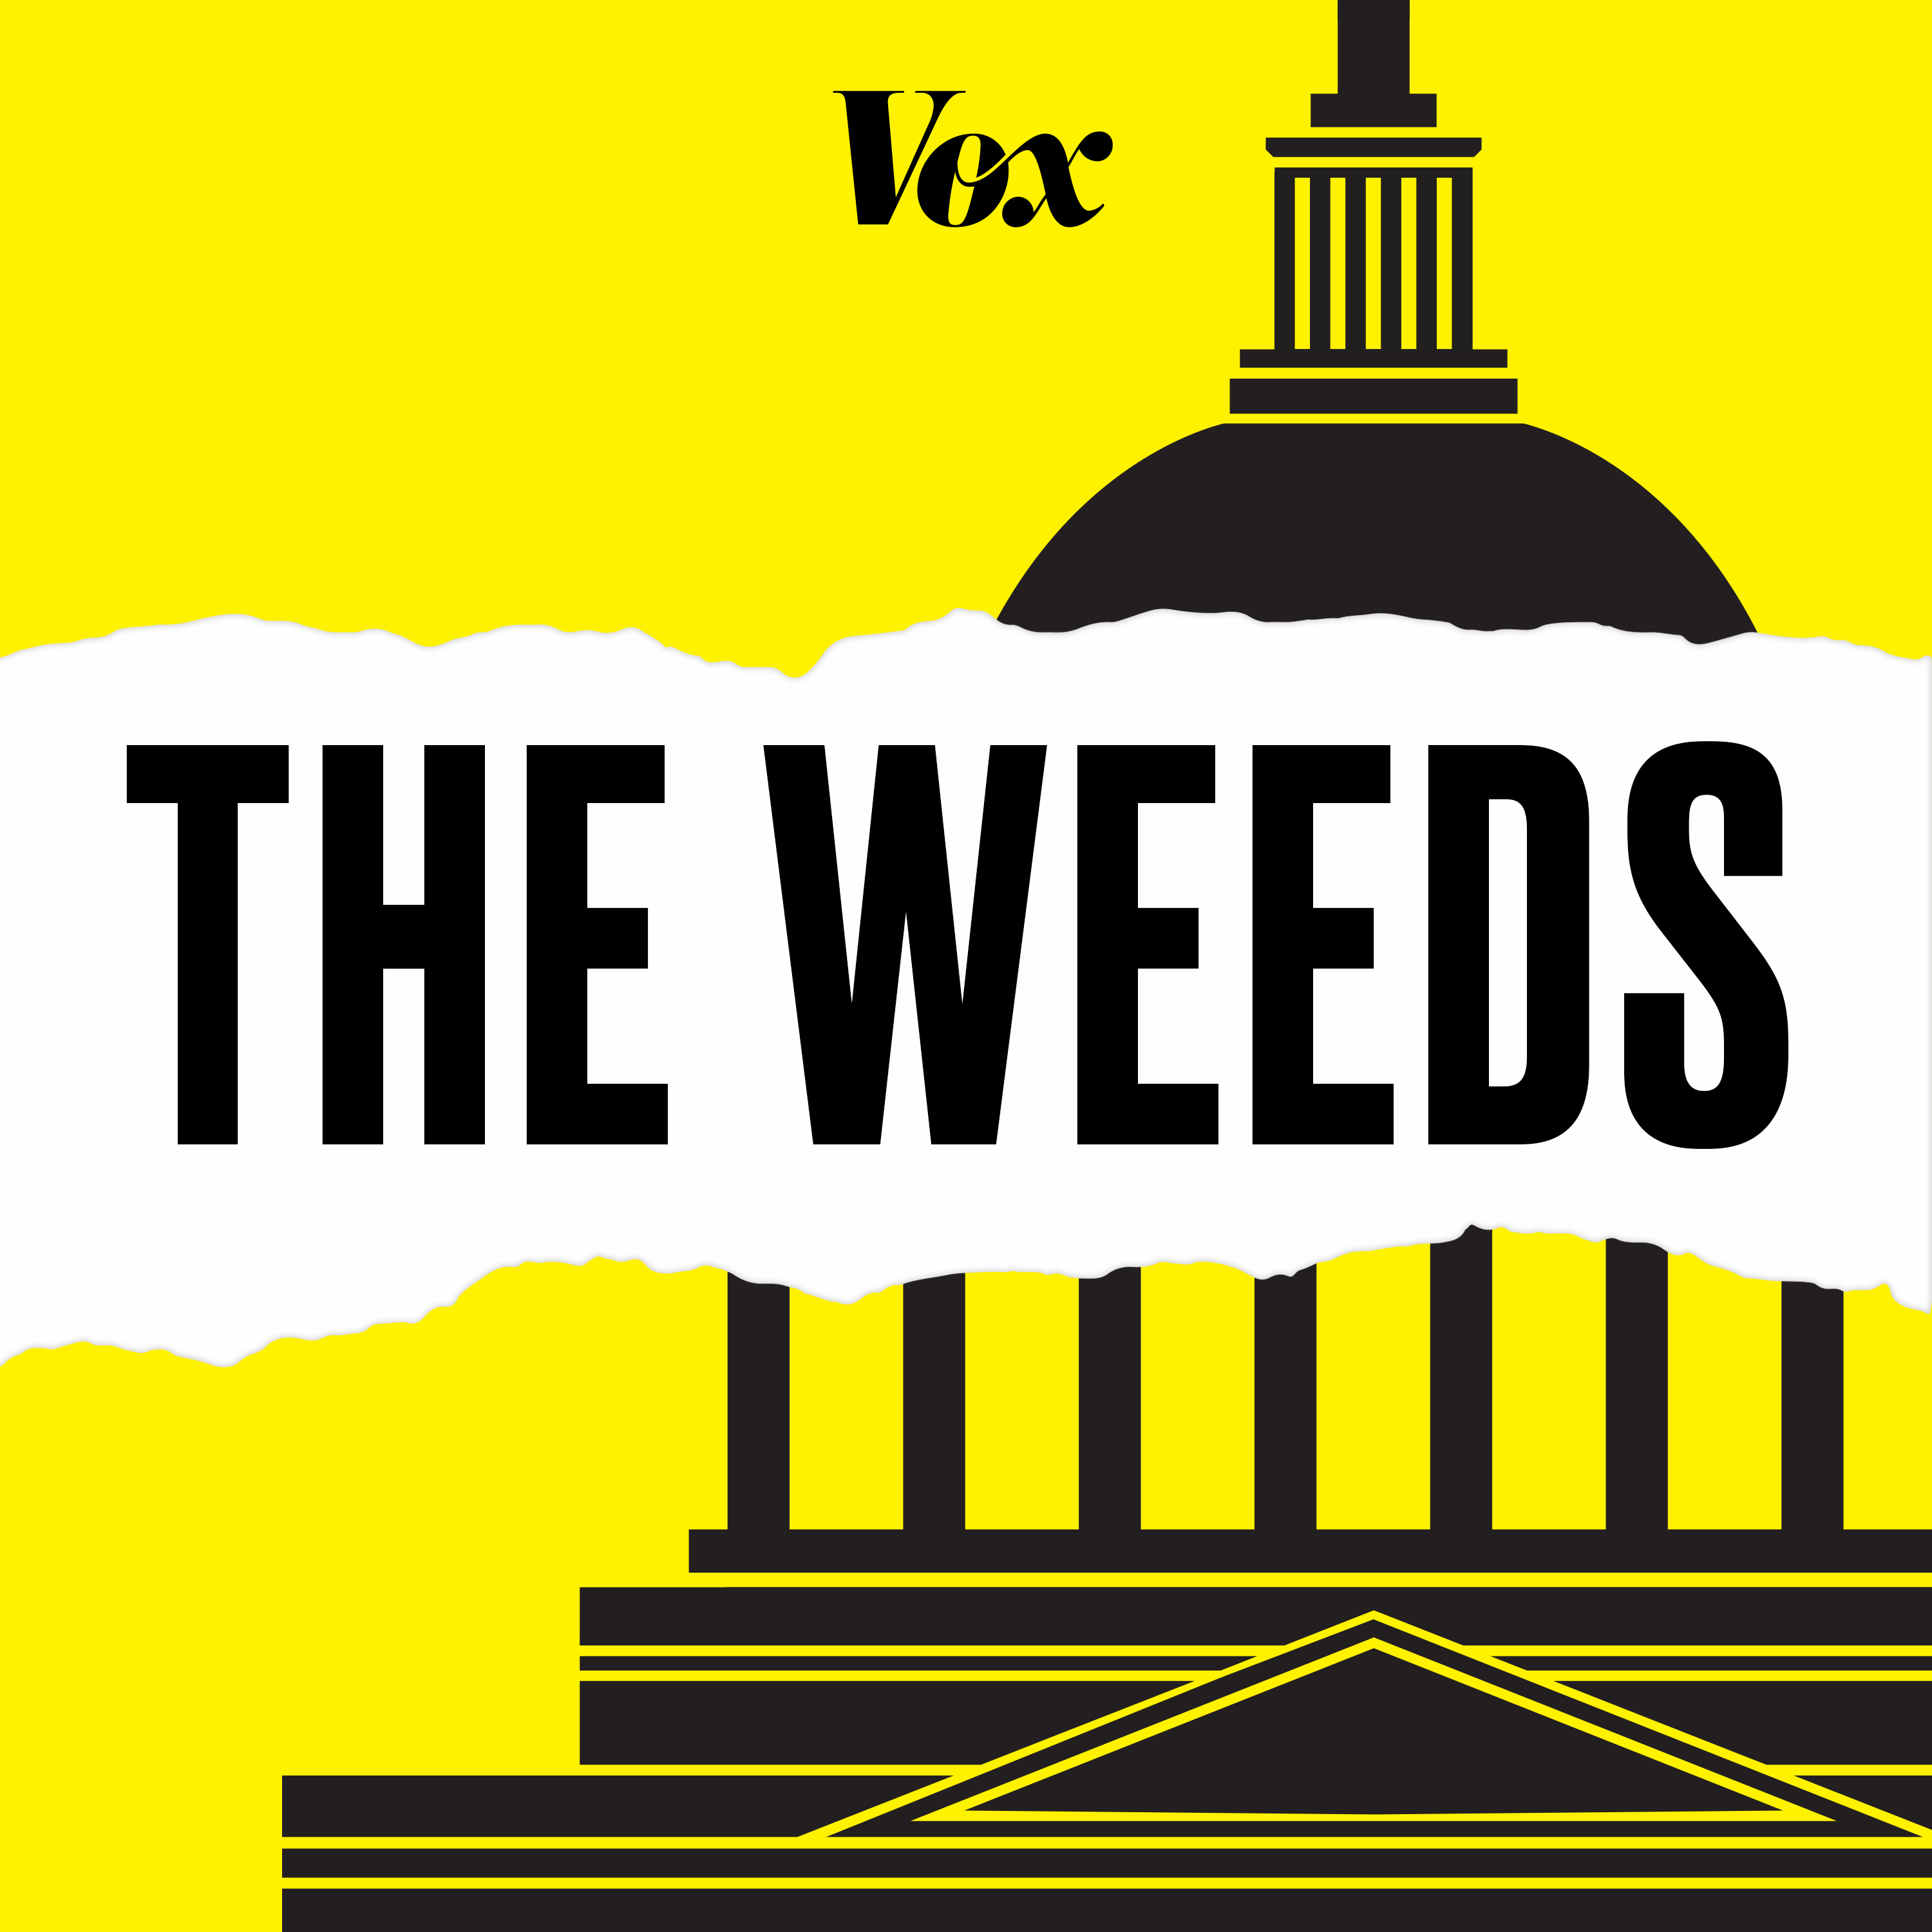 The cover of the podcast The Weeds